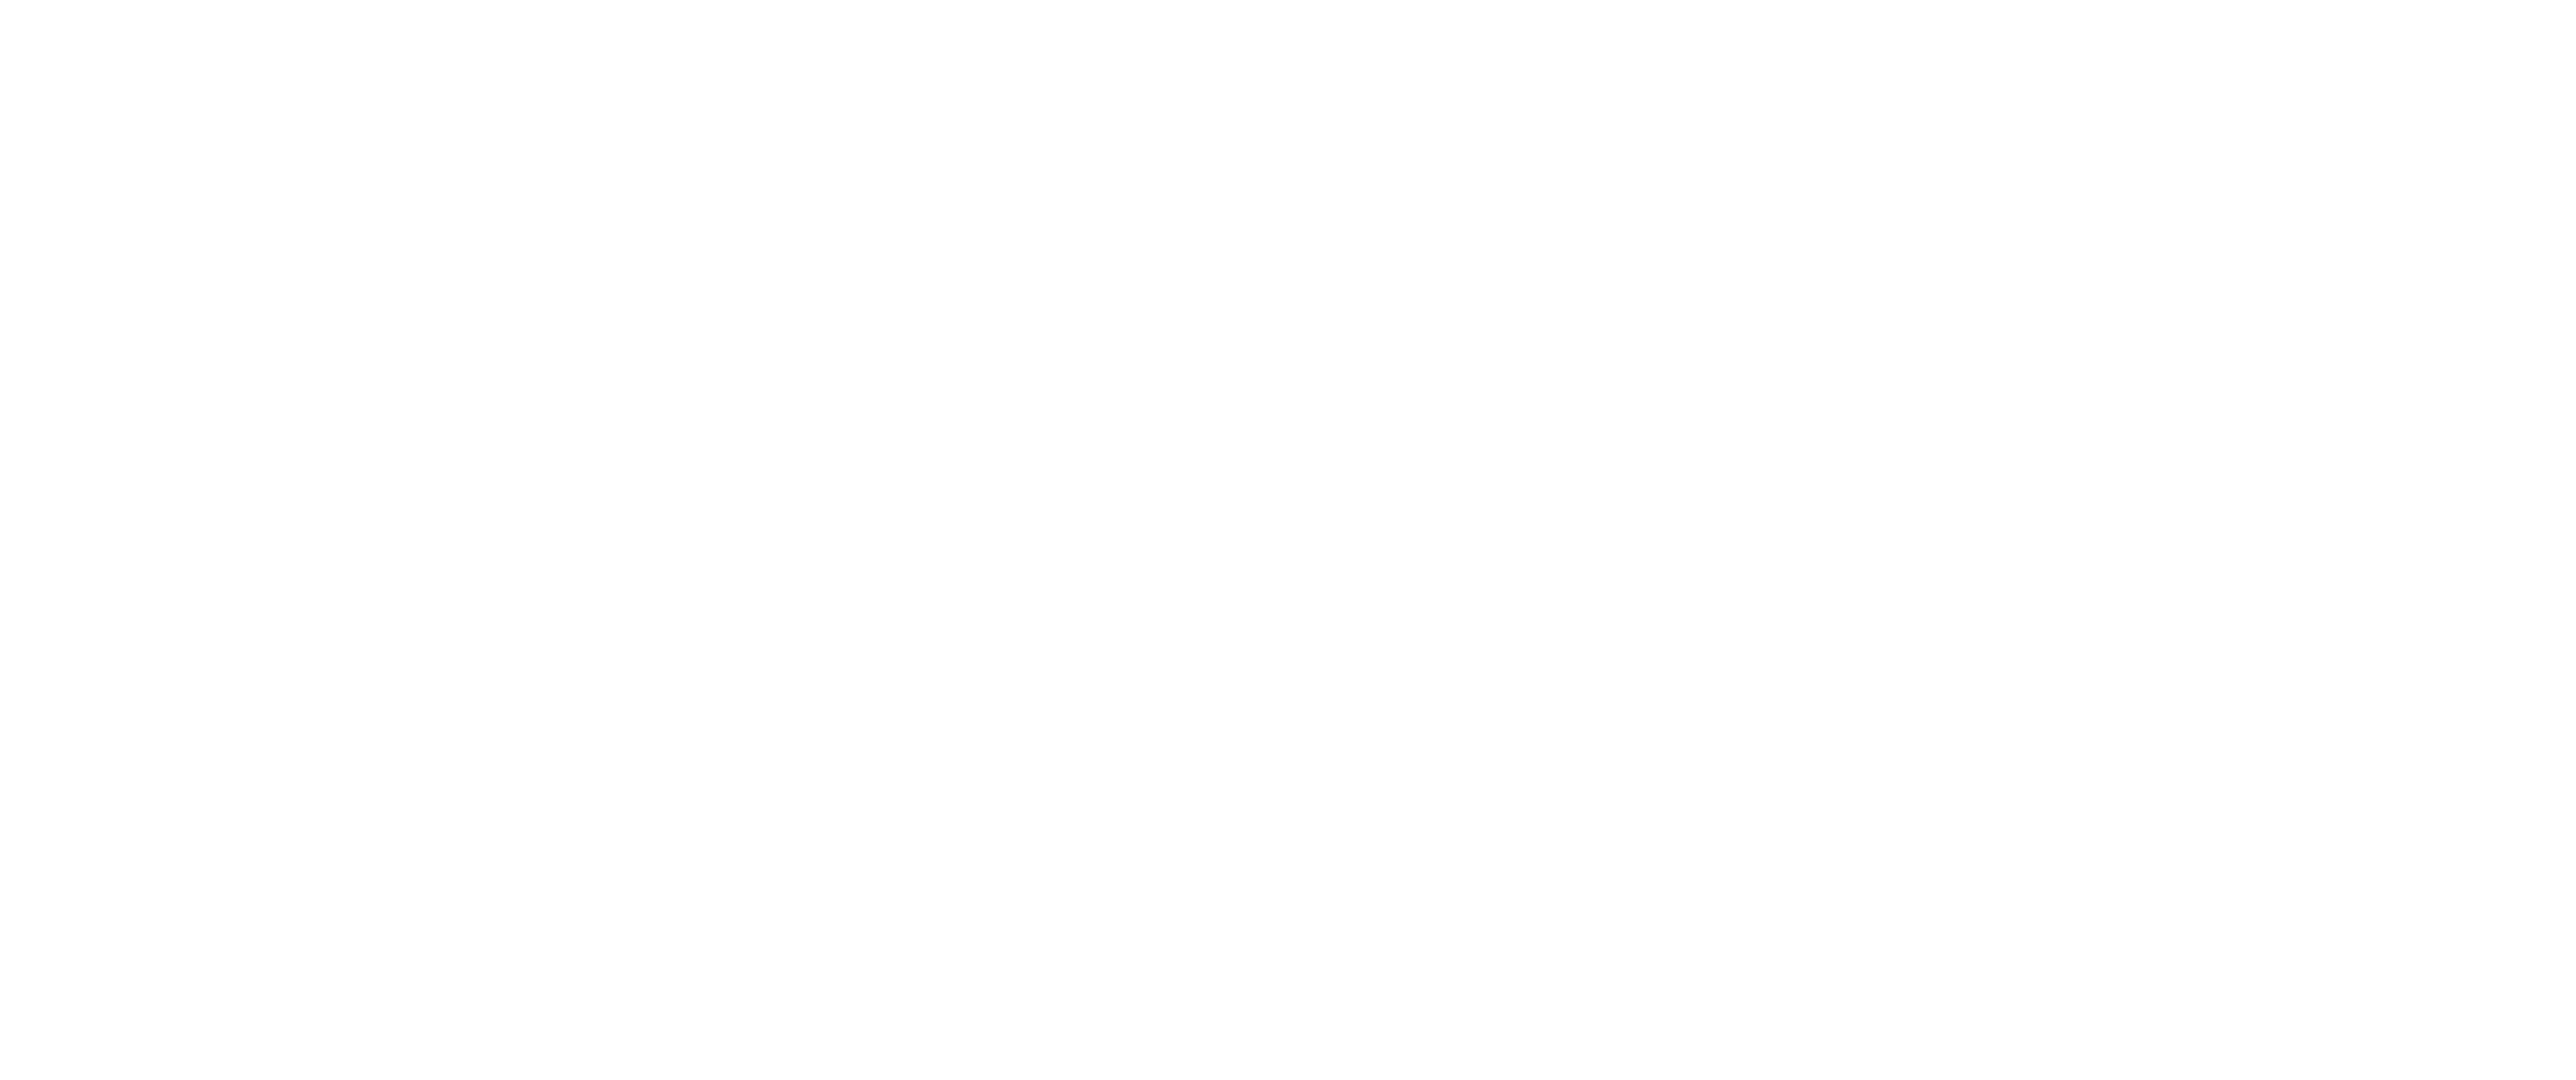 cnftestbed-horizontal-white.png